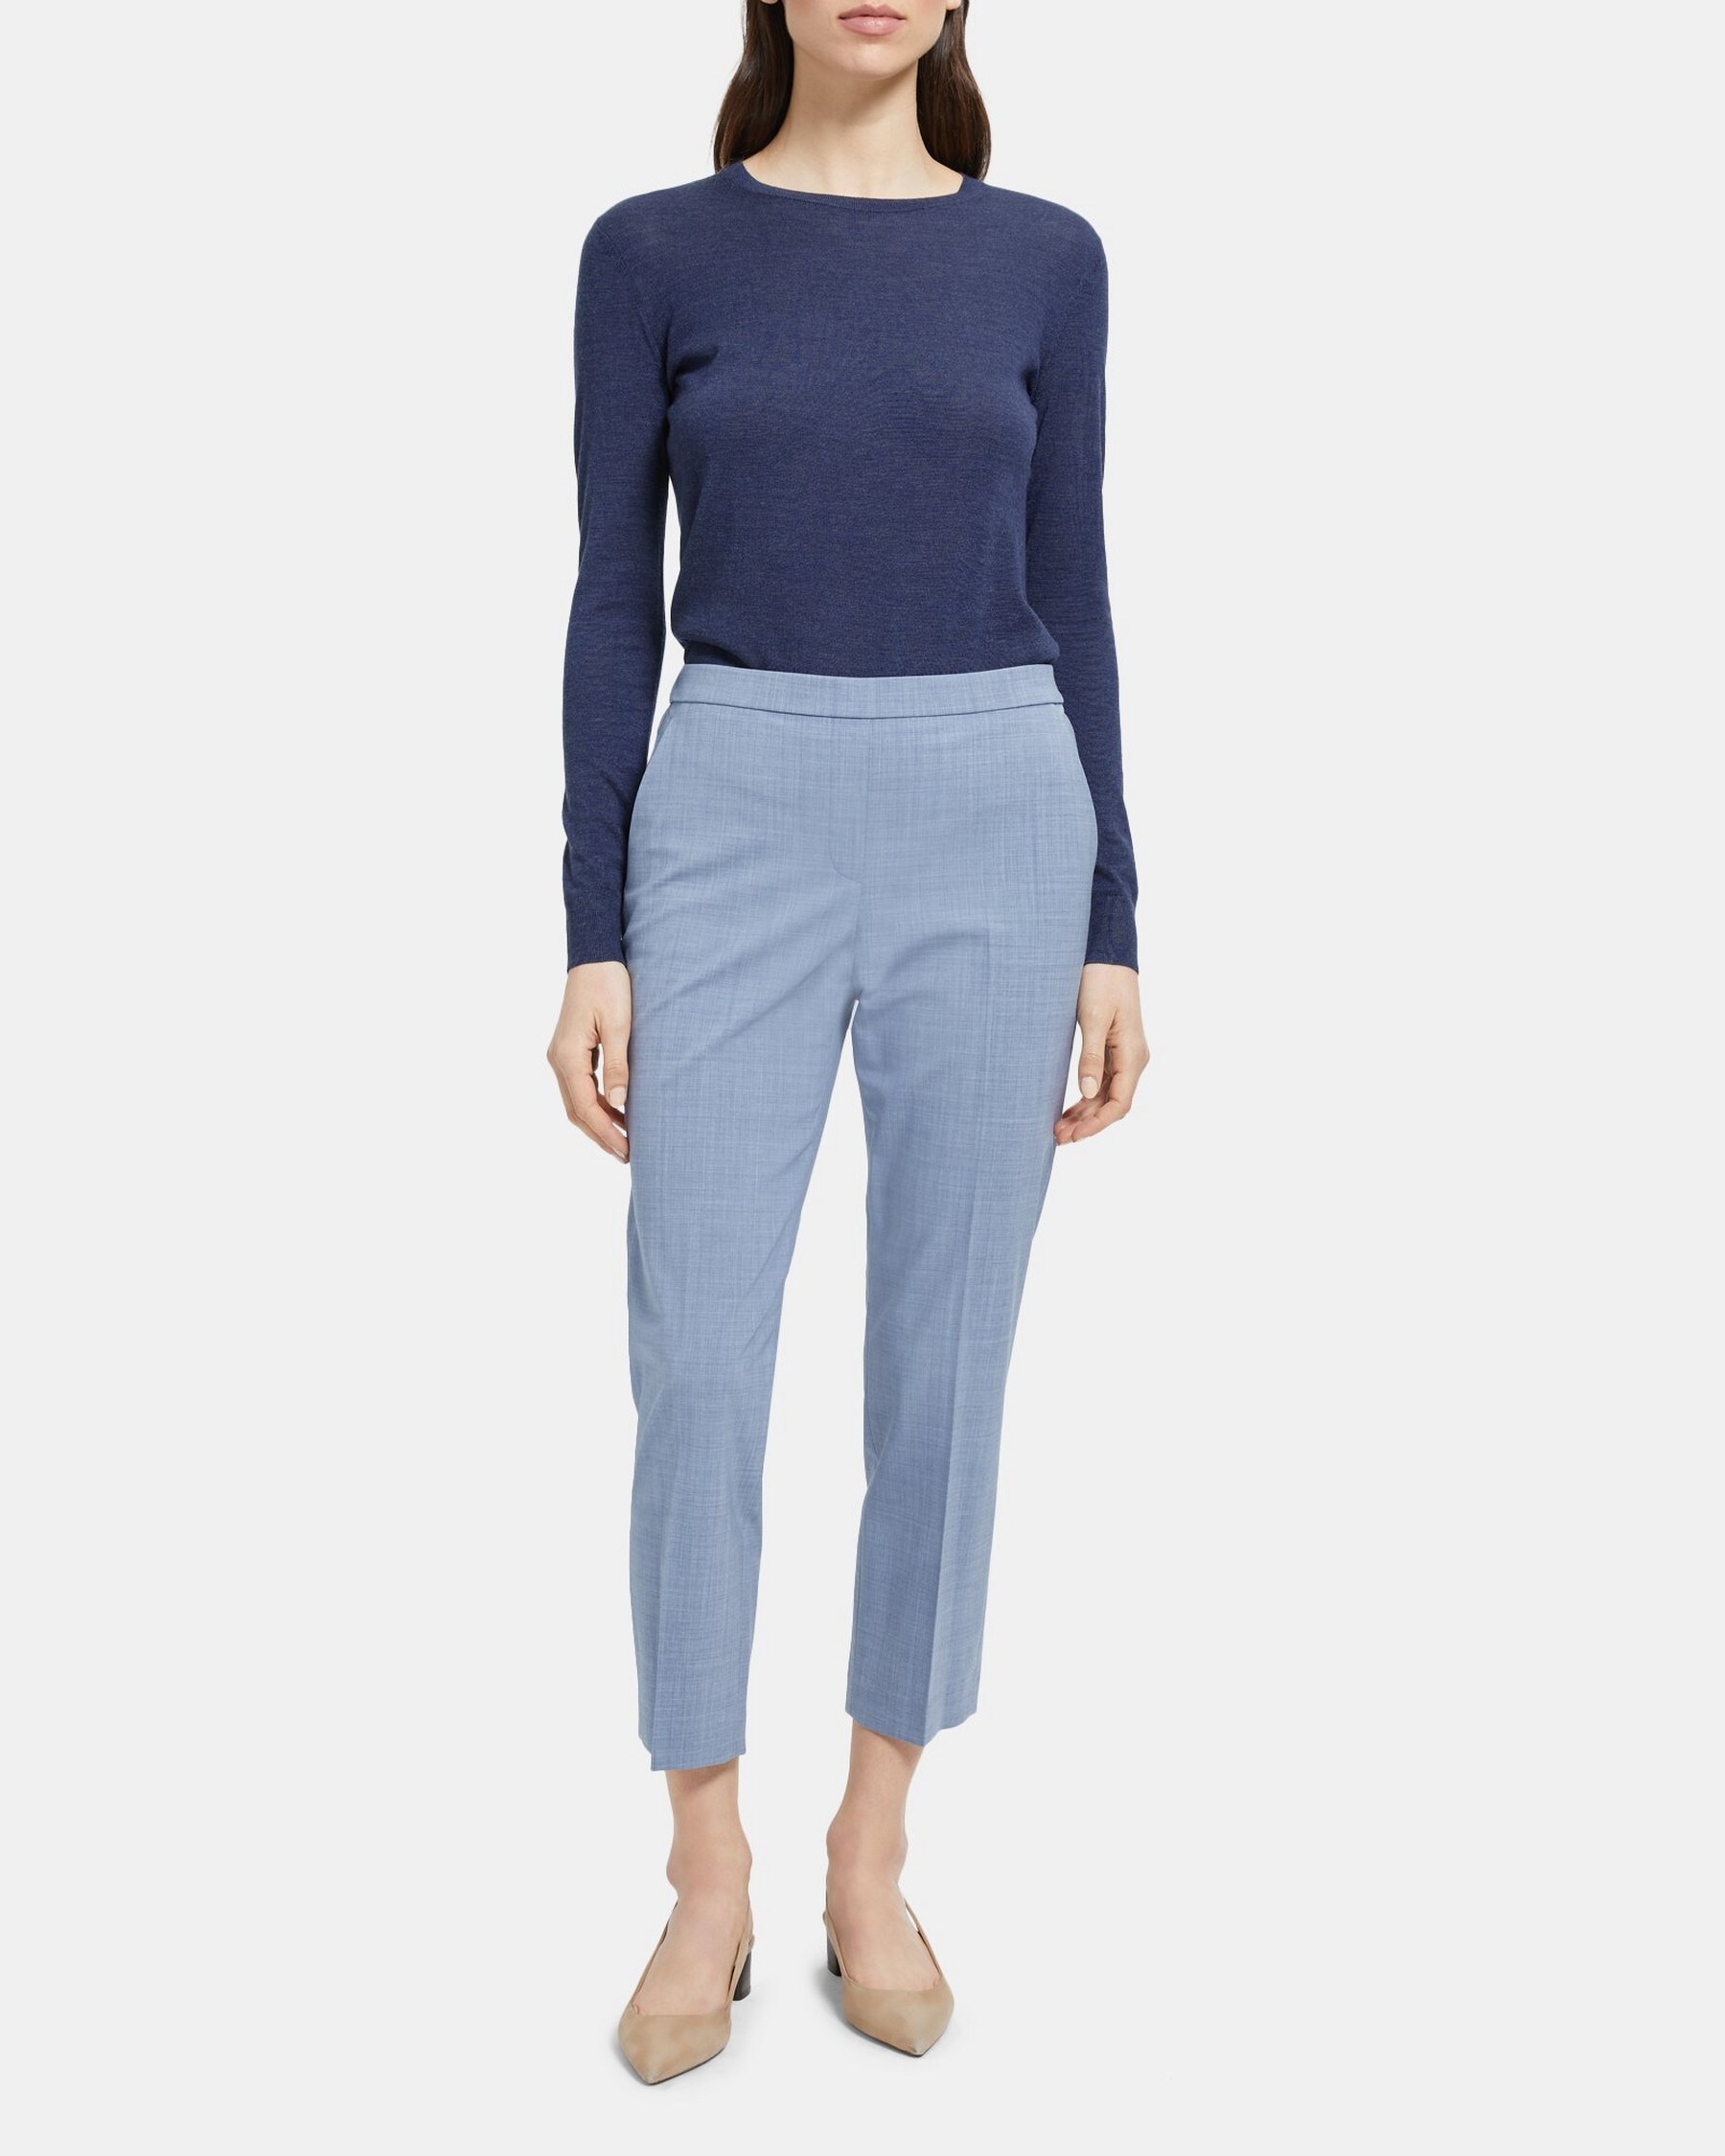 Theory Slim Cropped Pull-On Pant in Stretch Wool Melange